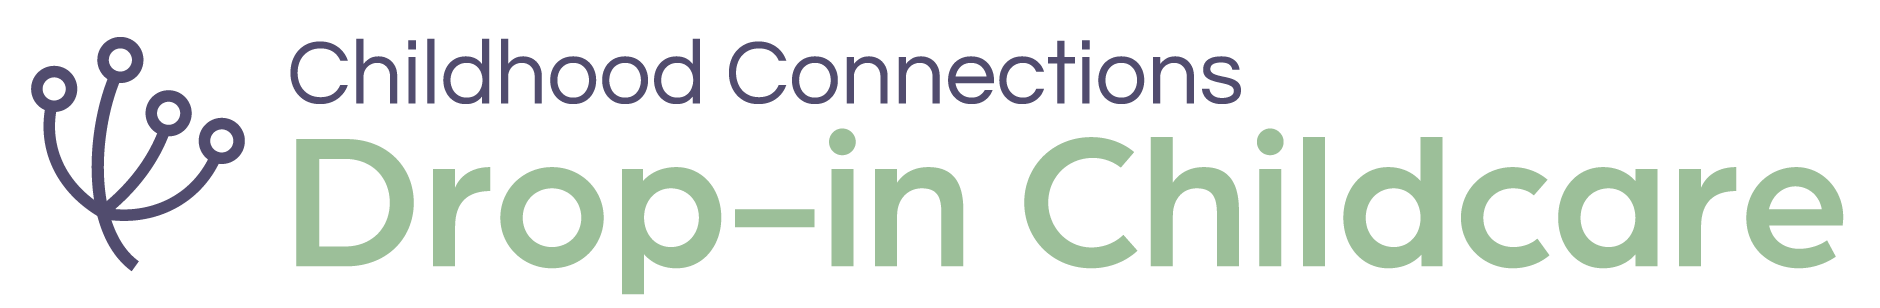 Childhood Connections Drop-in Childcare, located in Kelowna, BC